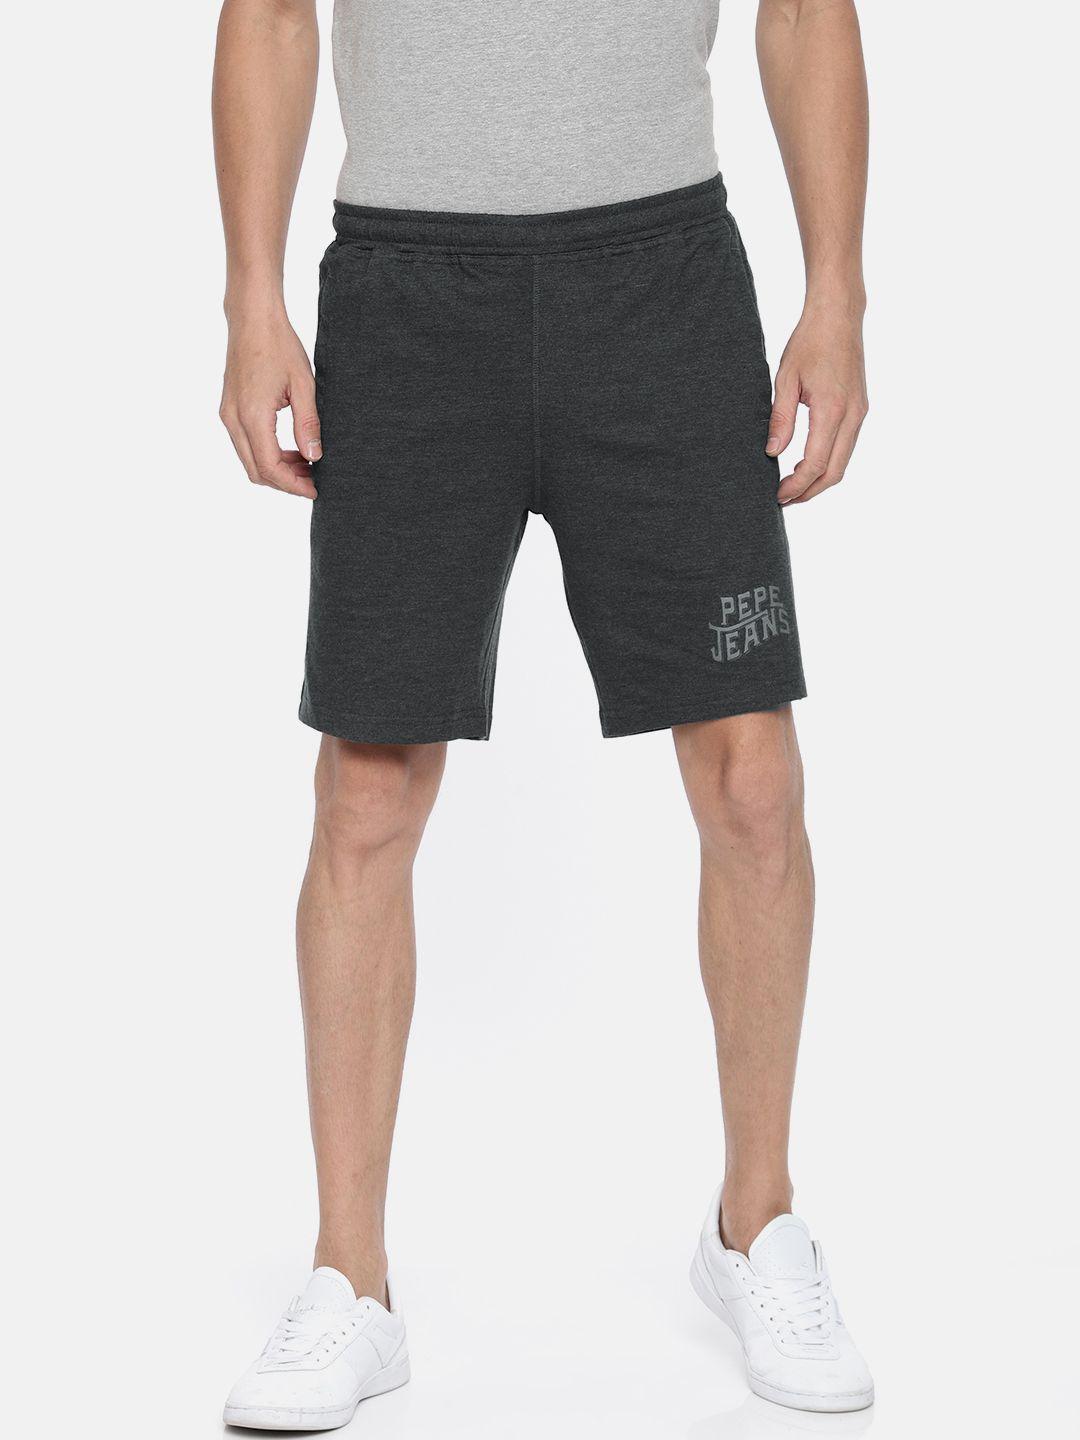 pepe jeans men charcoal grey solid regular fit sports shorts